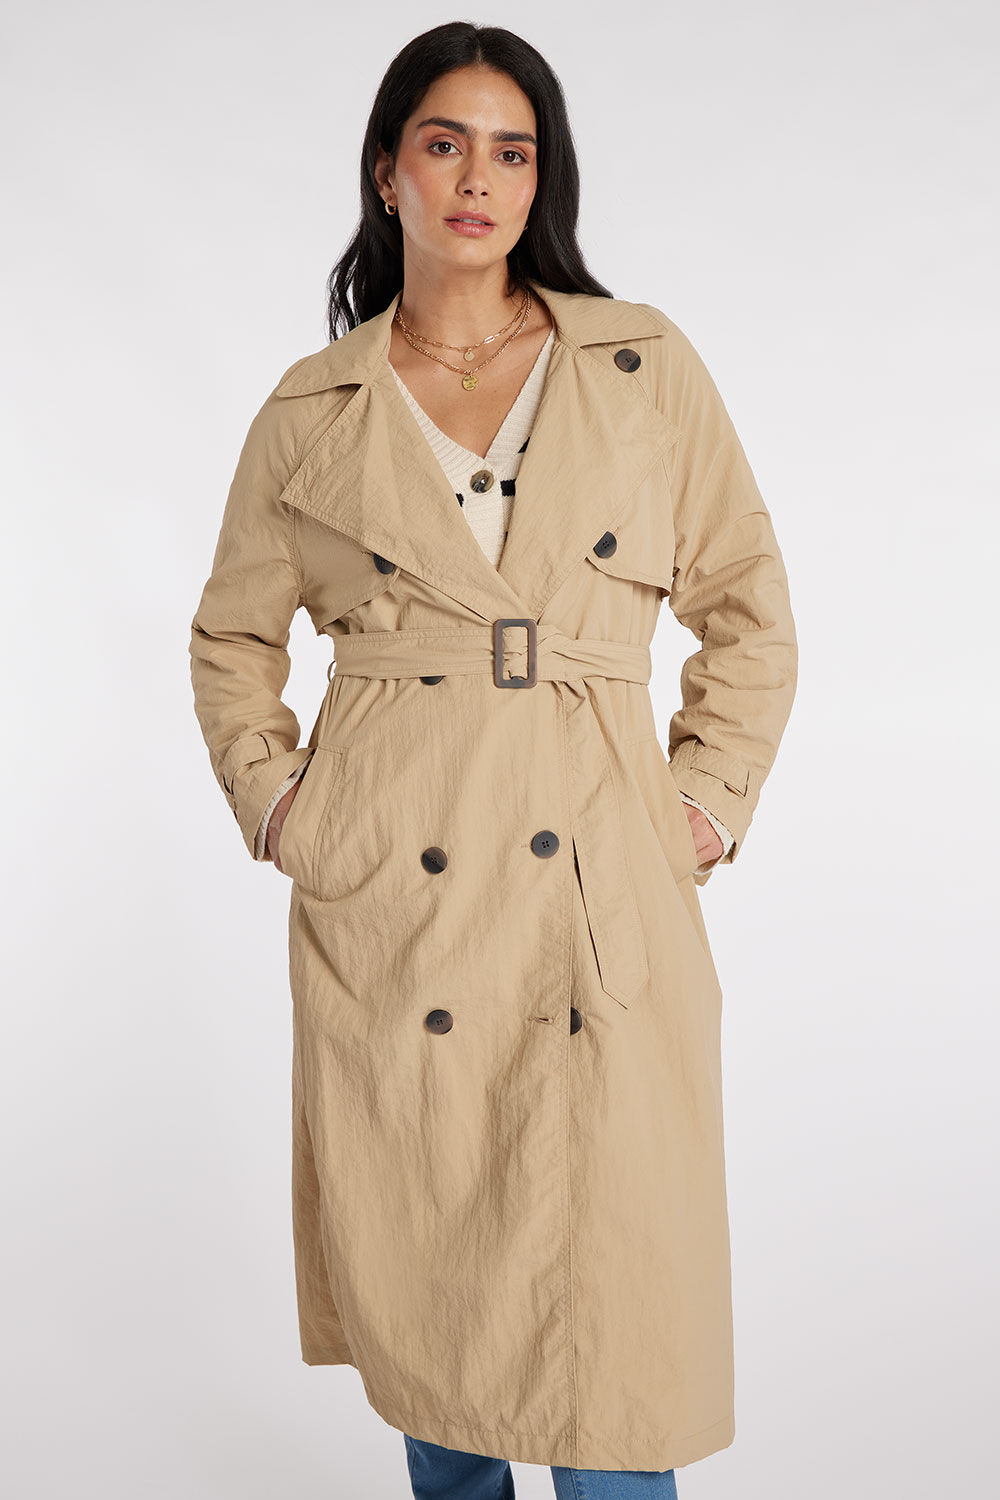 Brave Soul Tan - Trench Style Coat, Size: 8